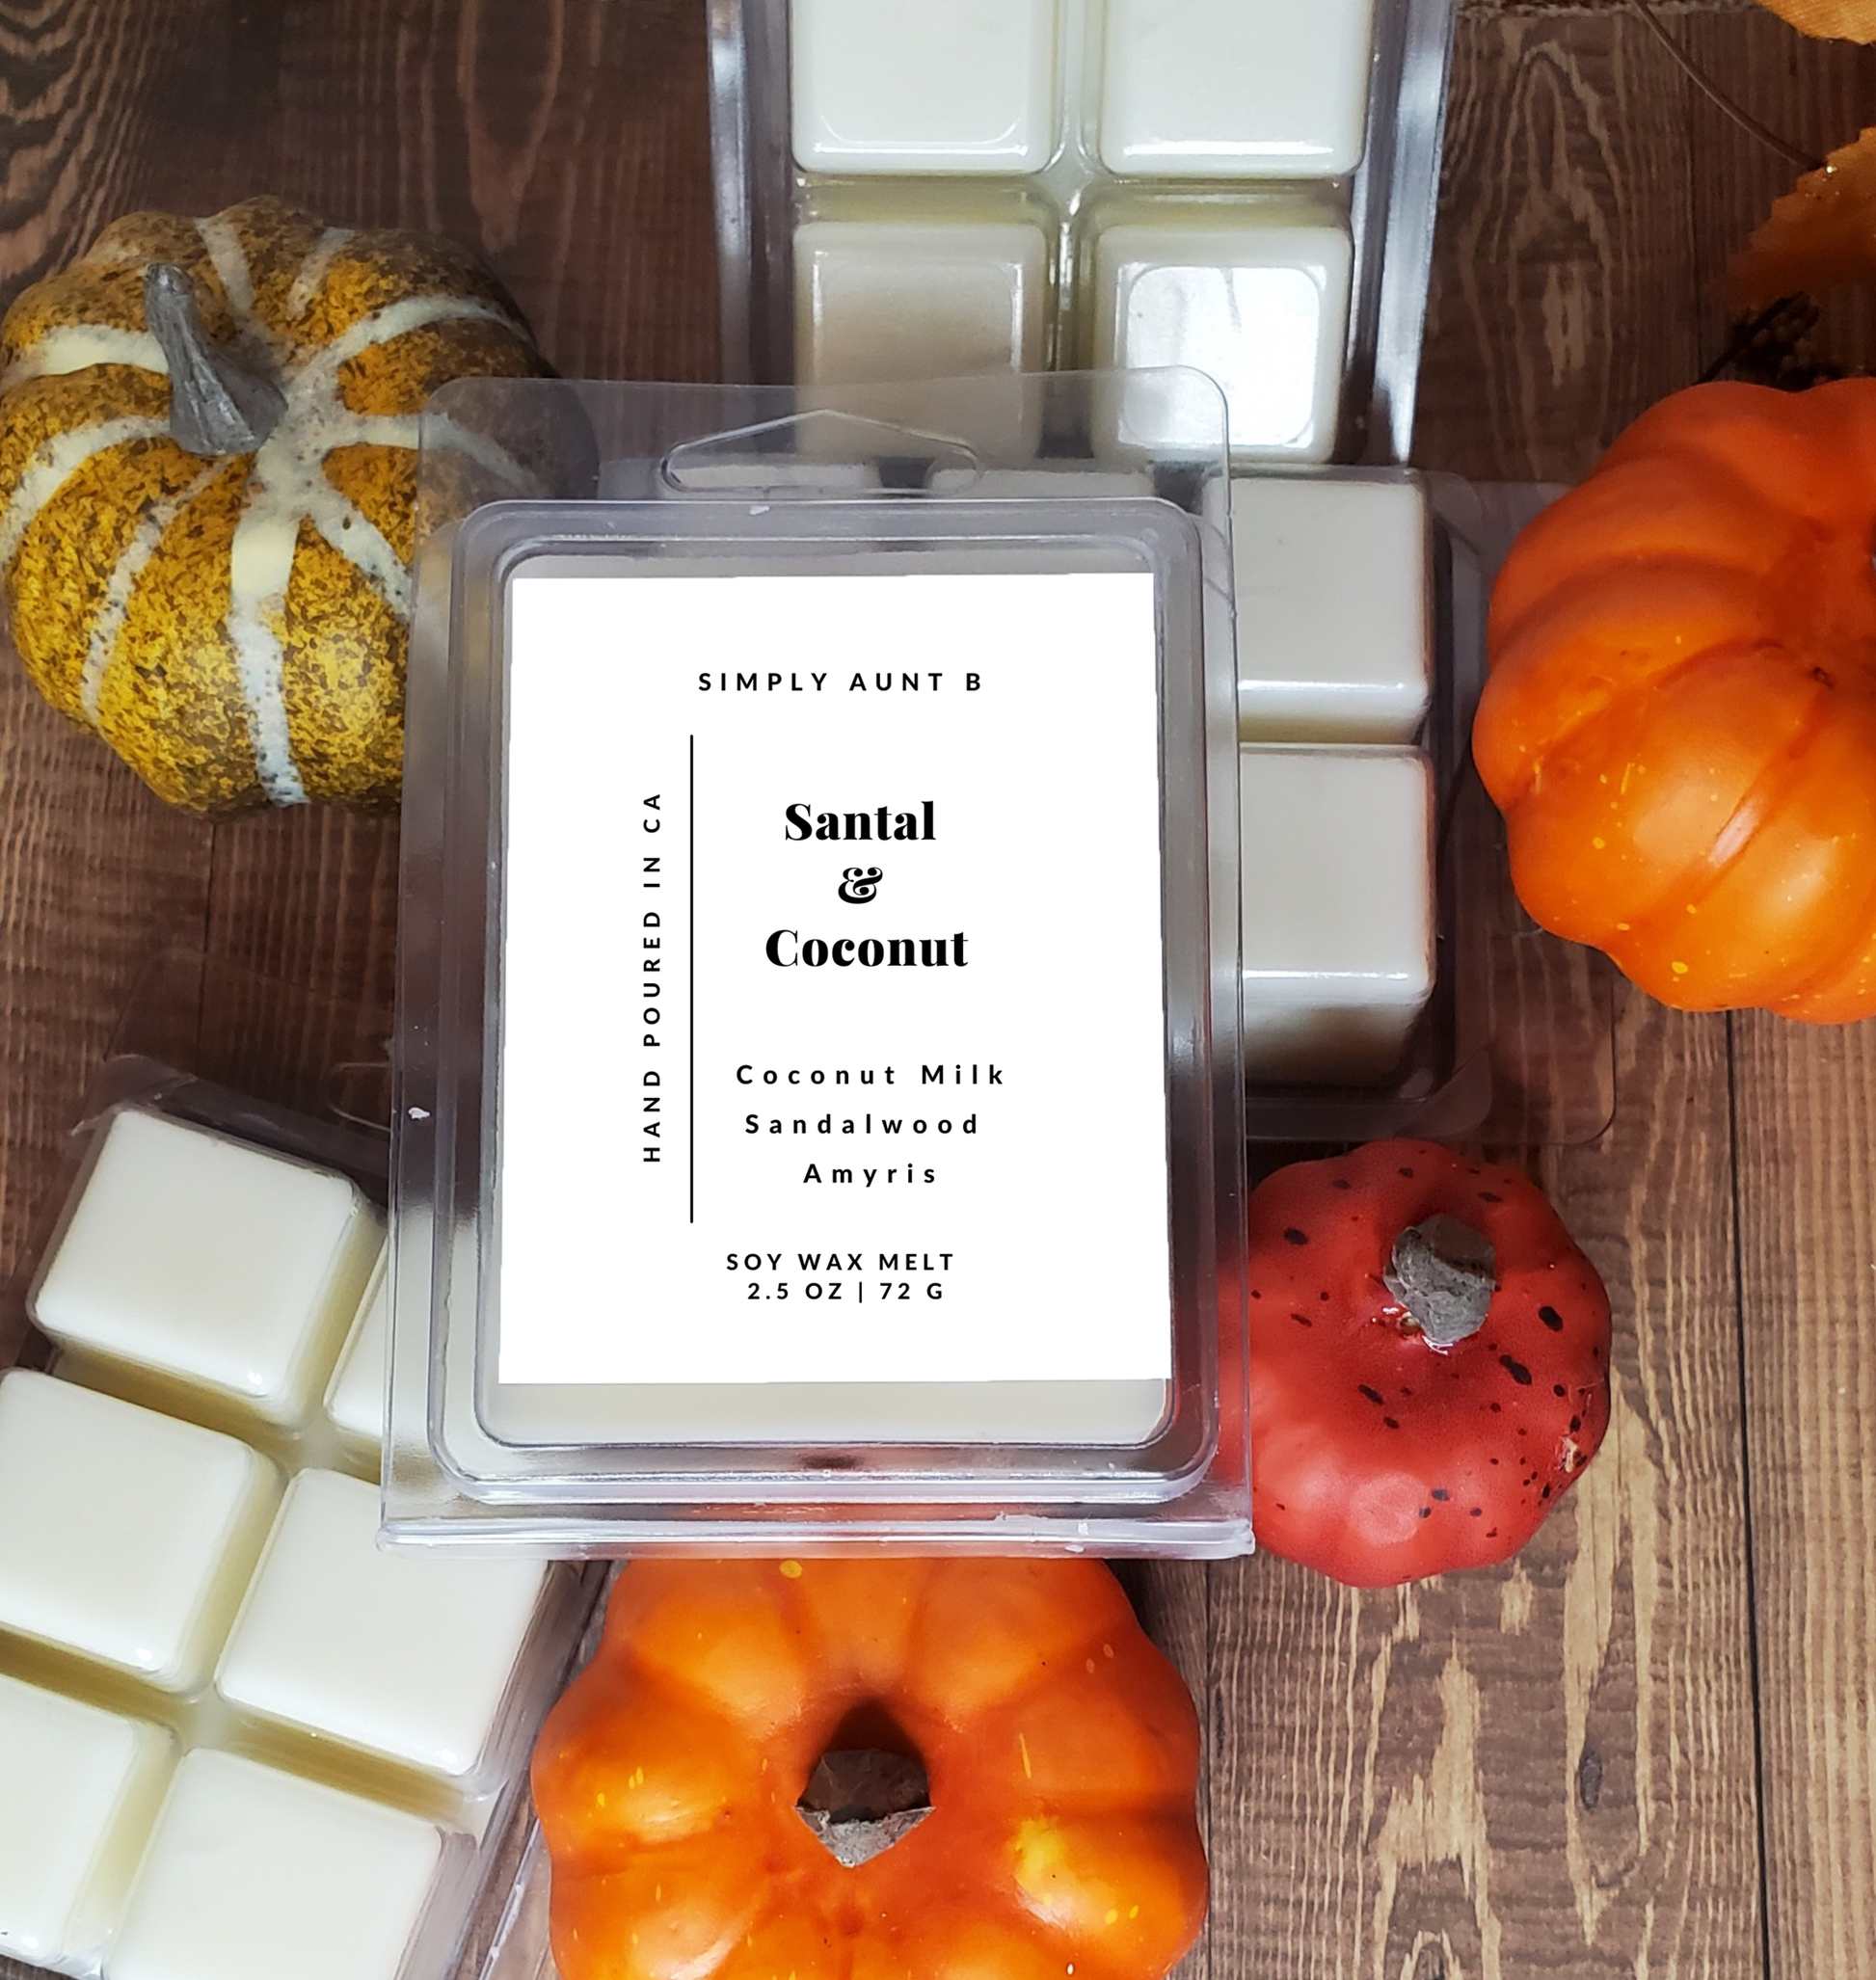 Scented Fall Wax Melts Wax Cubes for Scented Wax Hong Kong